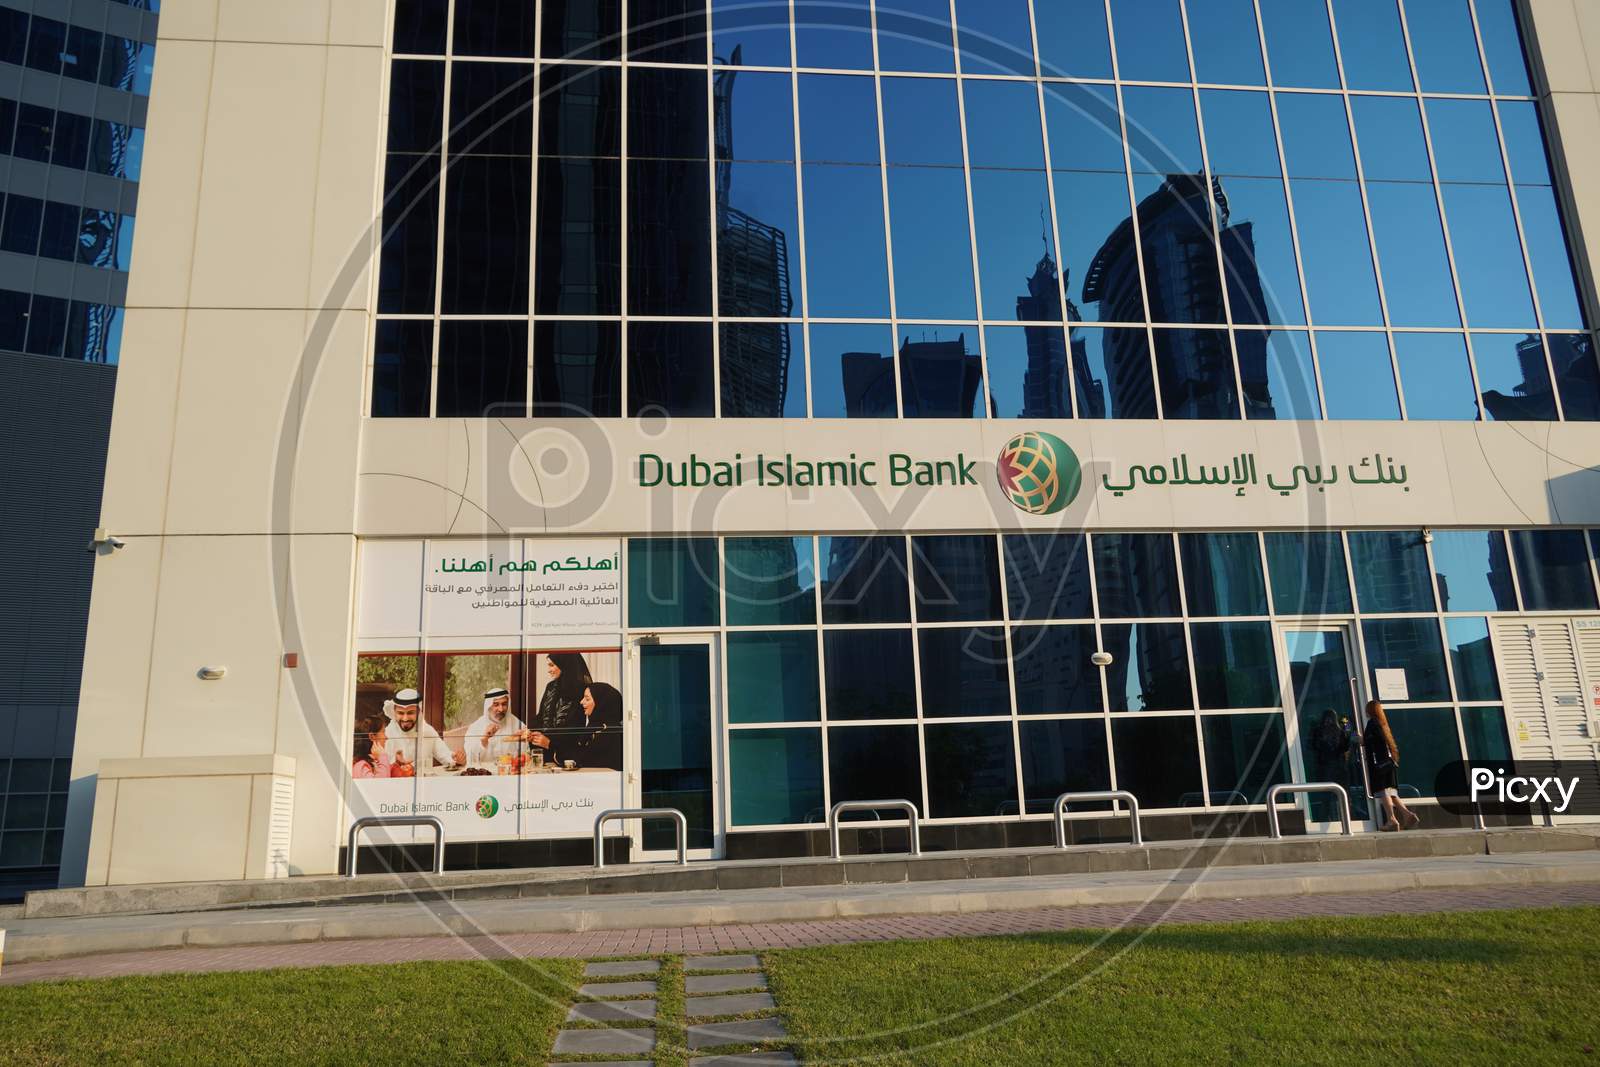 Dubai Islamic Bank A Major Middle Eastern Banks Building Sign Logo On Large Building Top On A Sunny Day. Bank Branch Store Front.